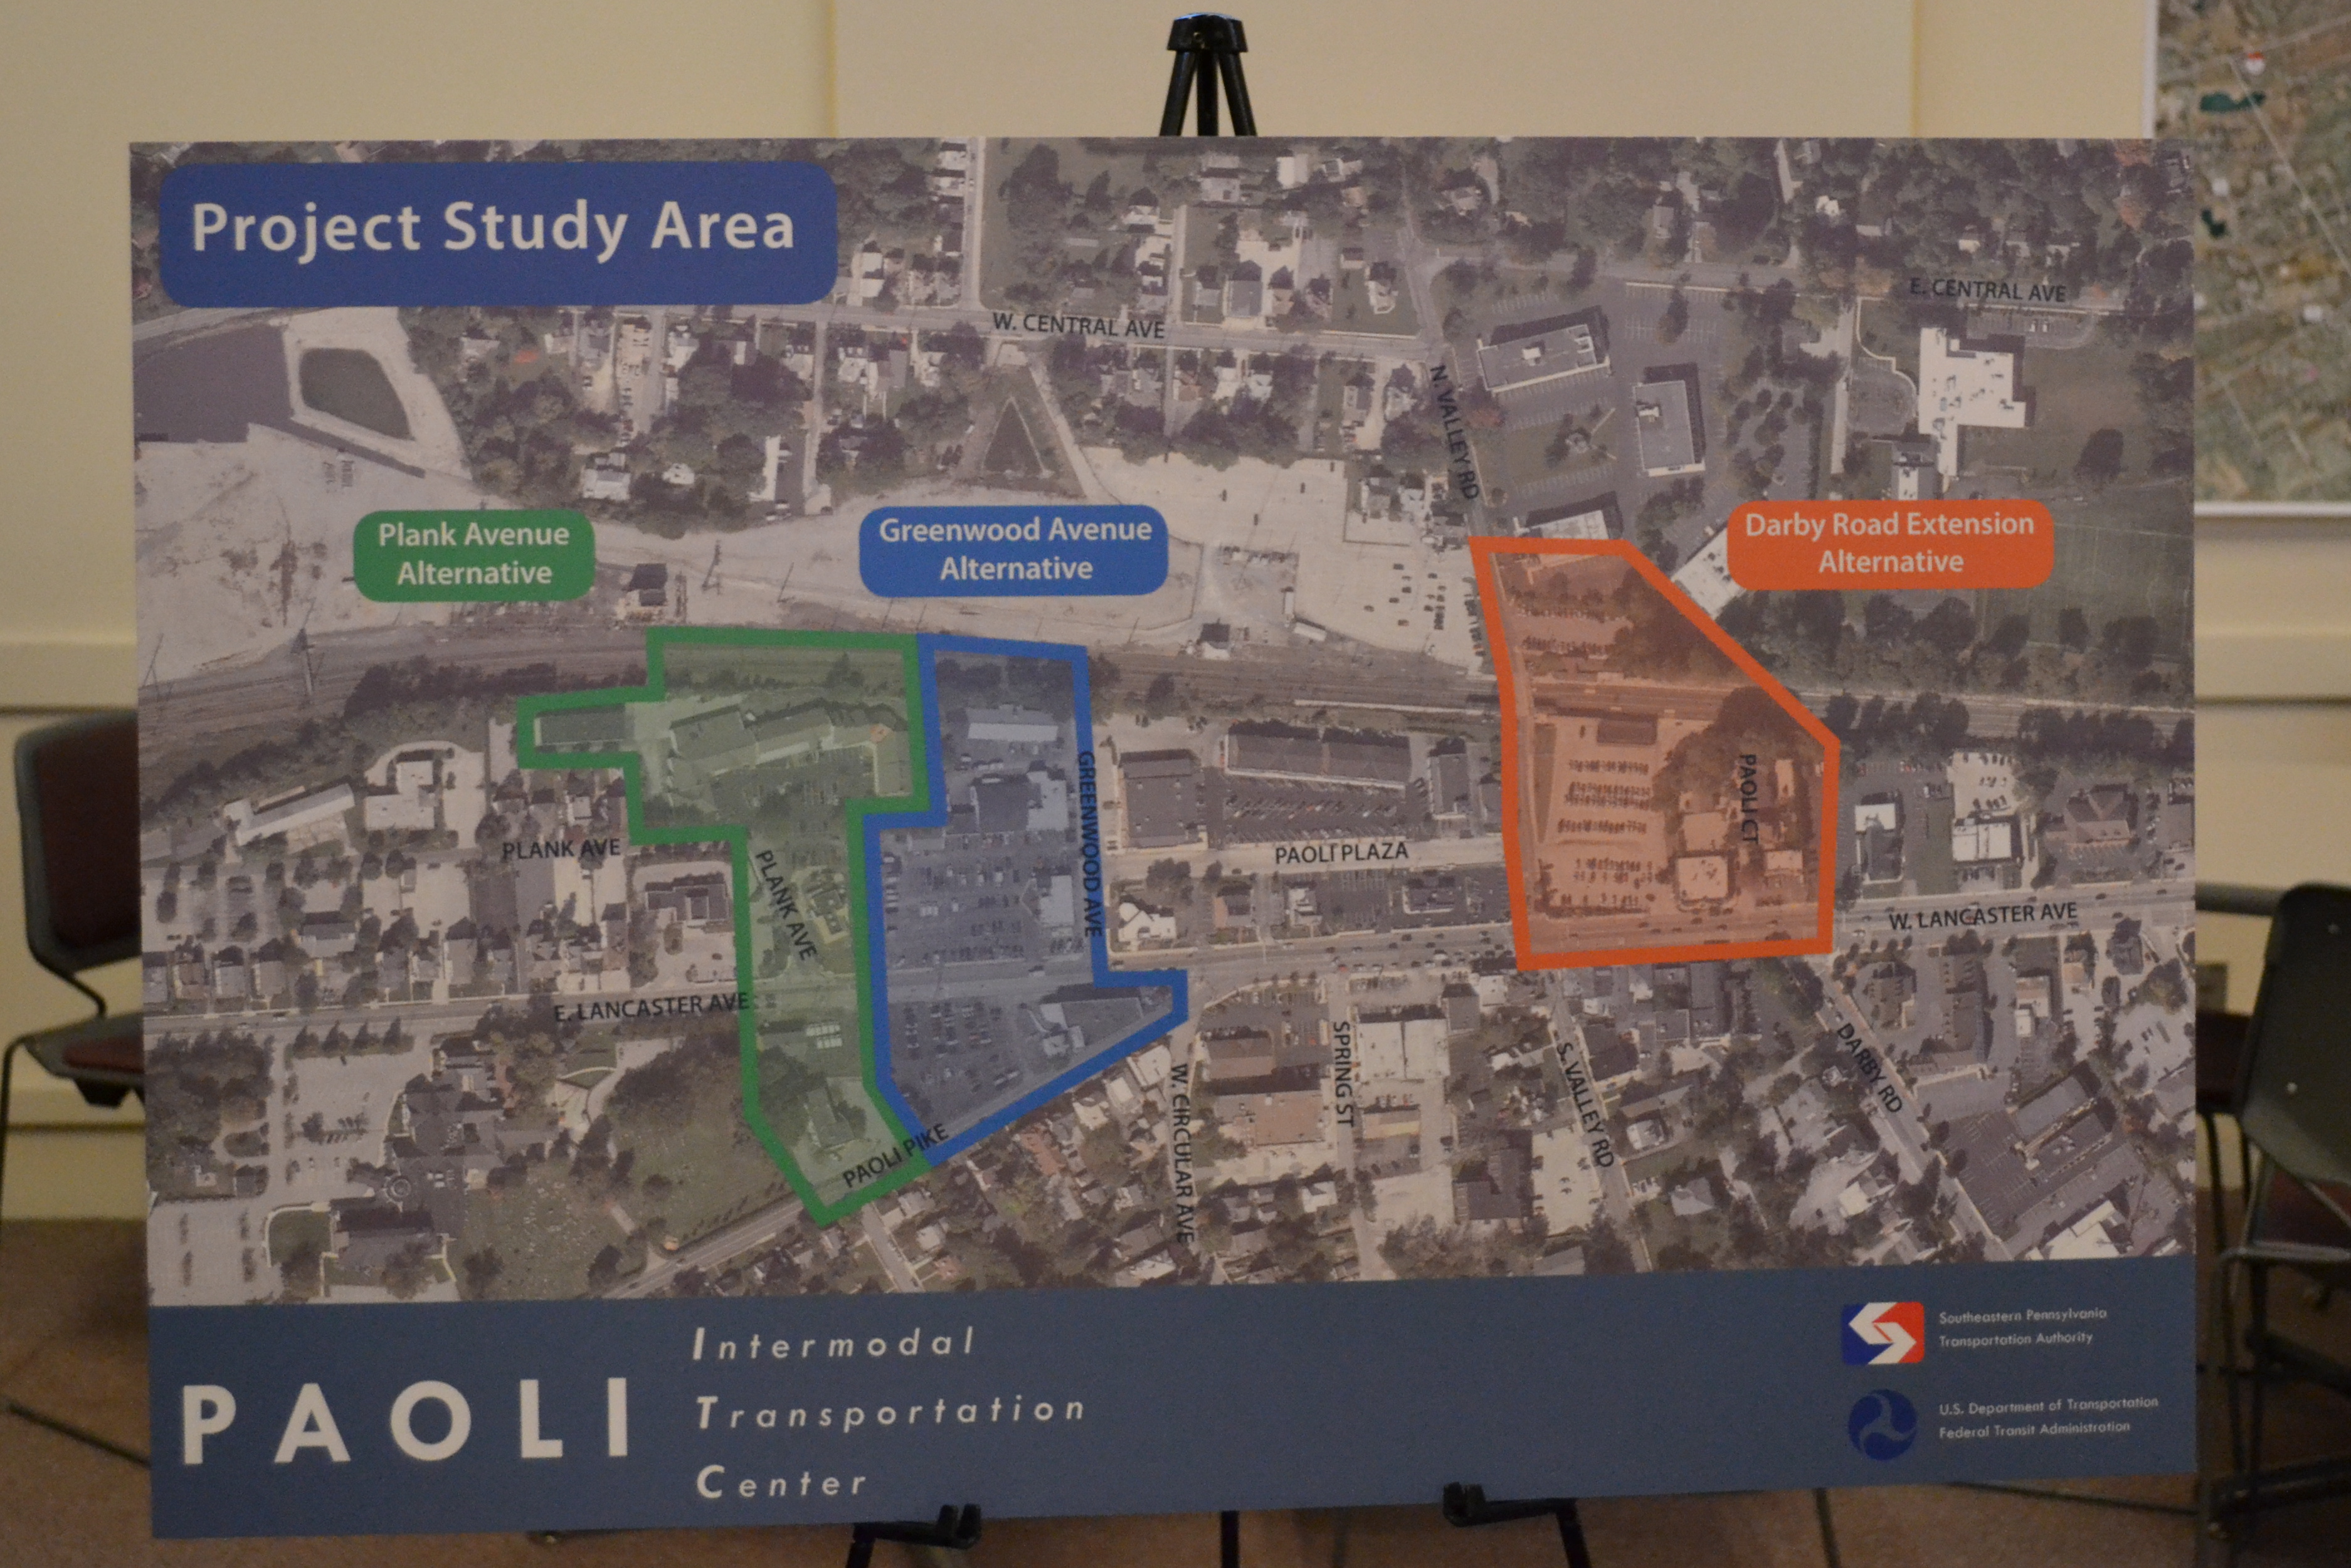 SEPTA presented three location options for the new Paoli ITC